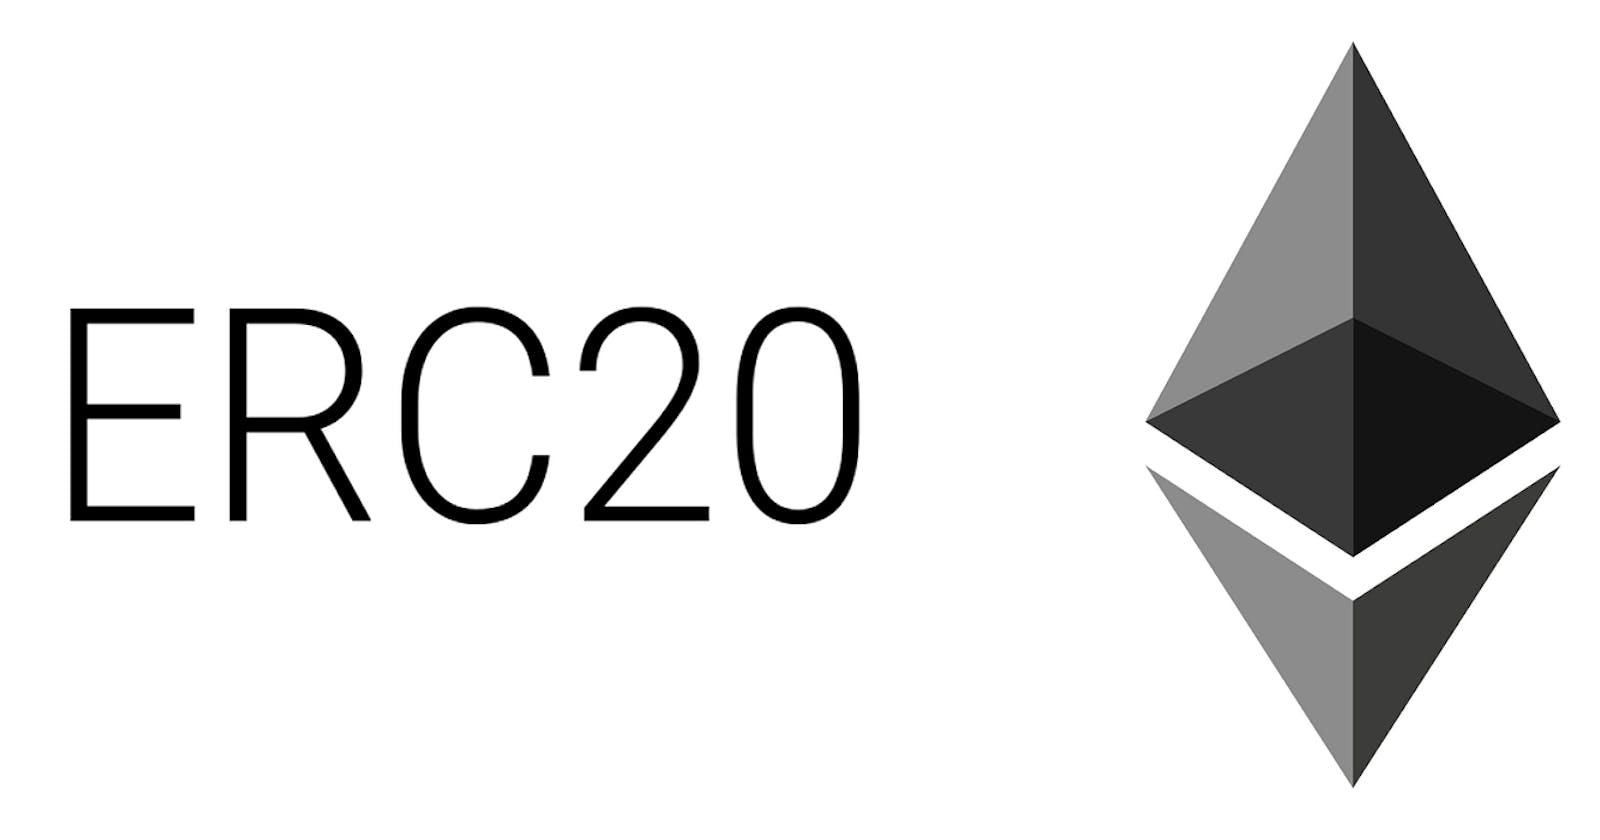 10 things every smart contract auditor should check when auditing an ERC20 Token contract.